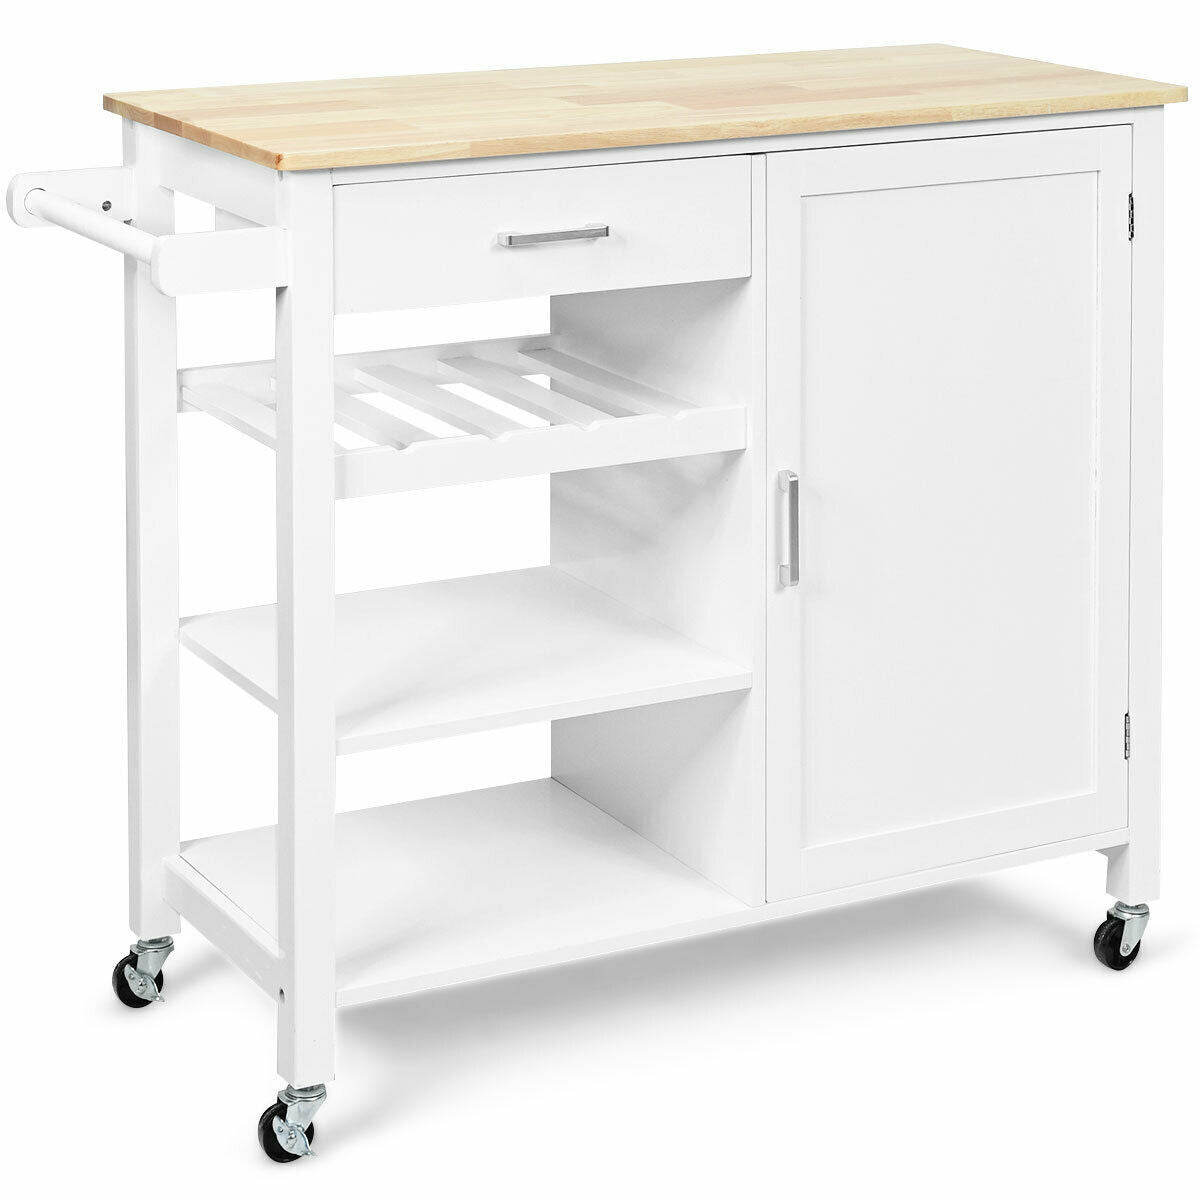 4-Tier Cart Kitchen Island Rolling Storage with Utility Serving Rack White